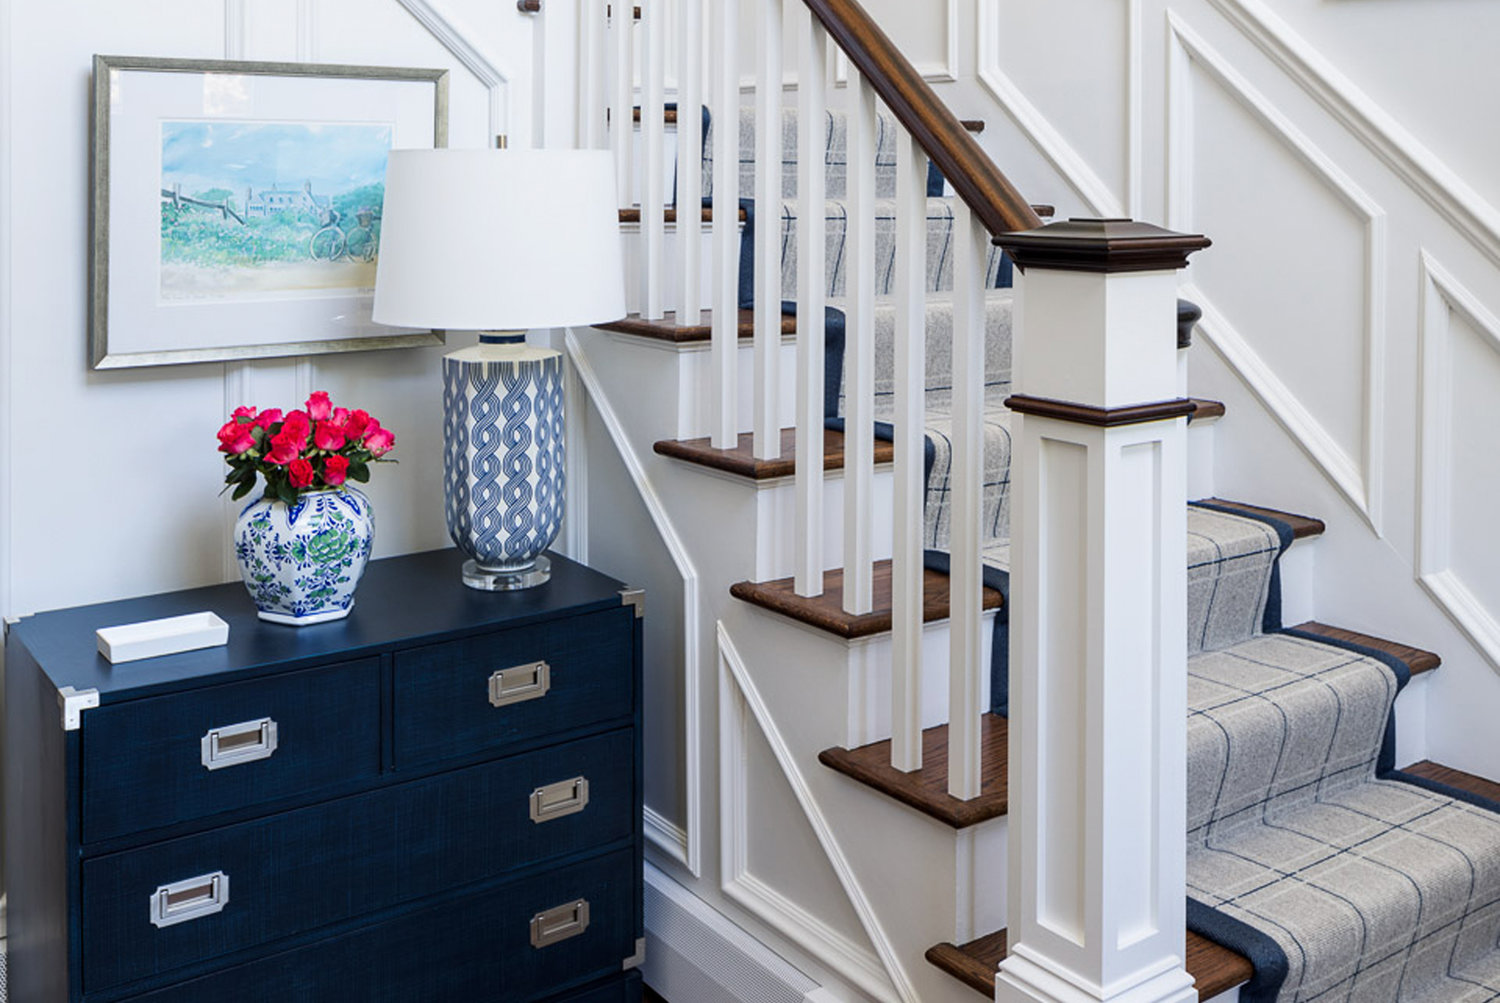 Stair runners add warmth and style